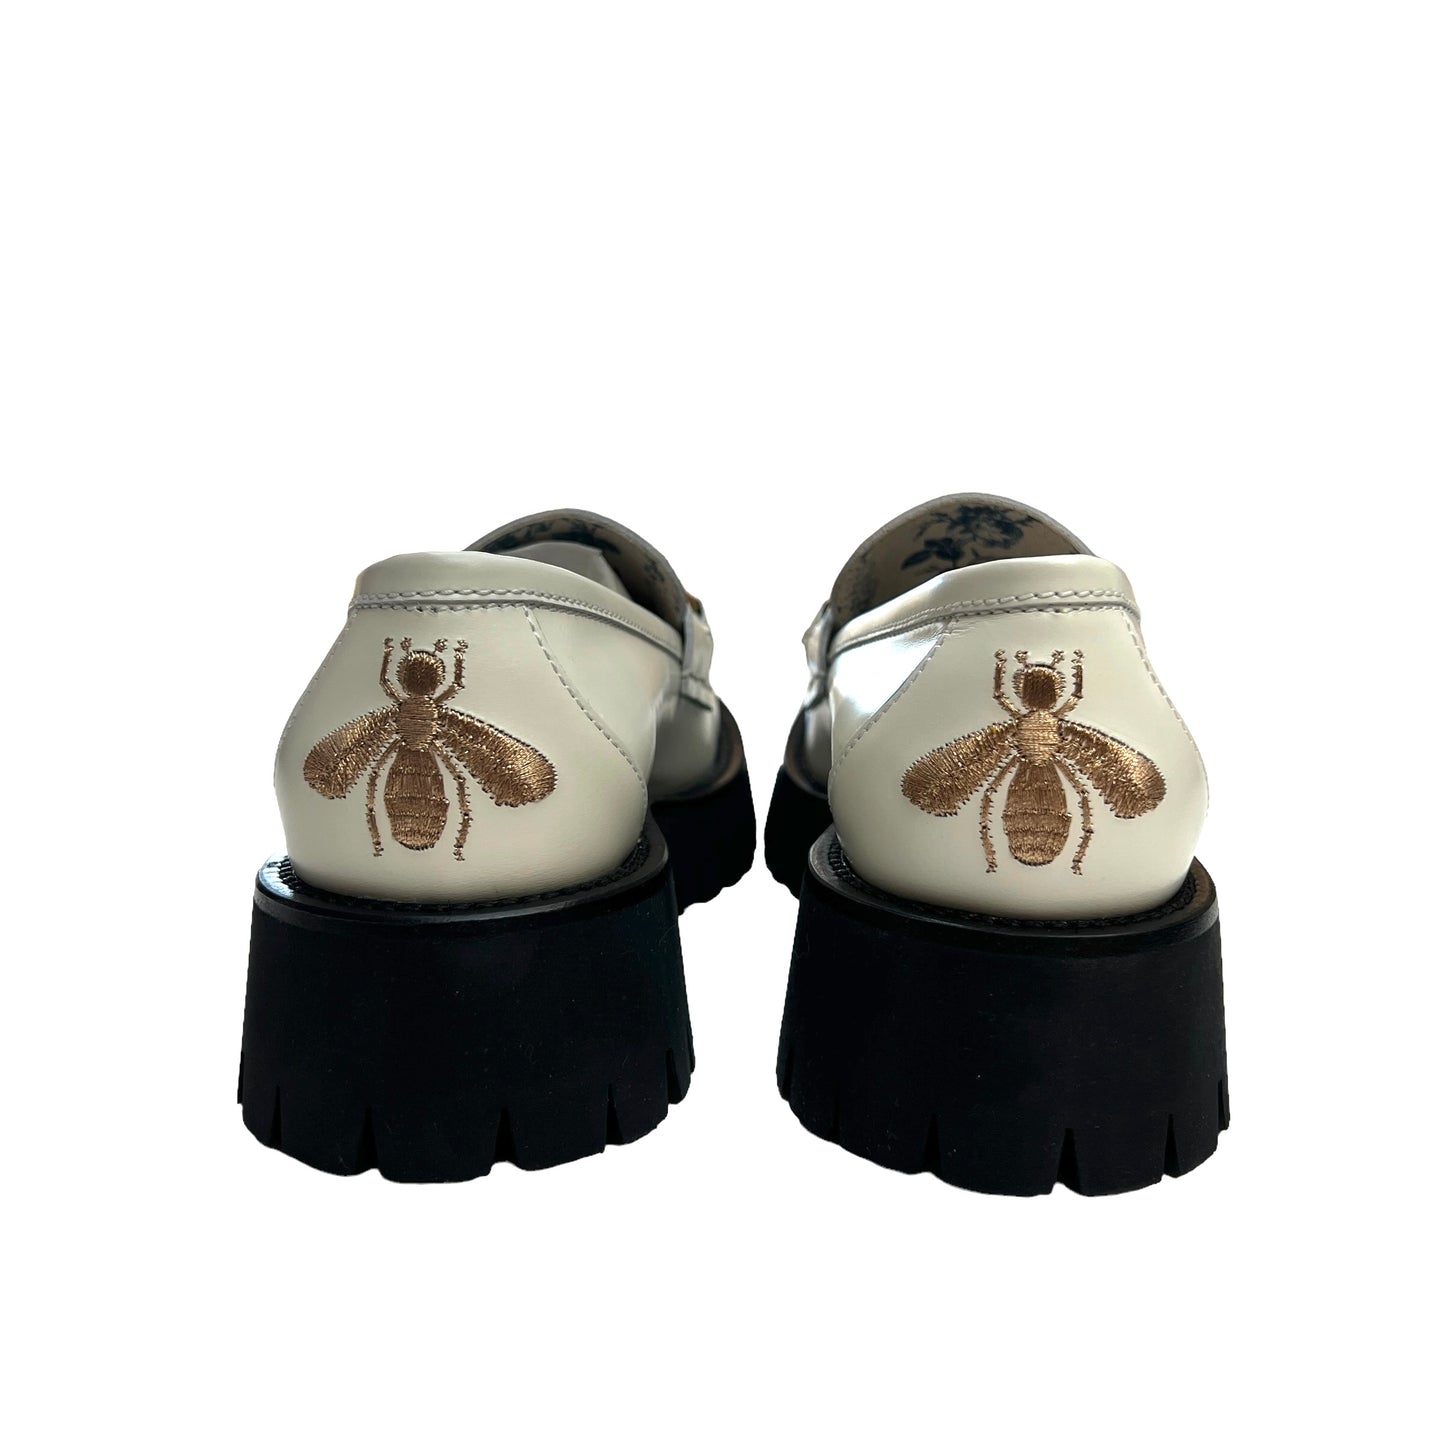 Dusty White Loafers - 7